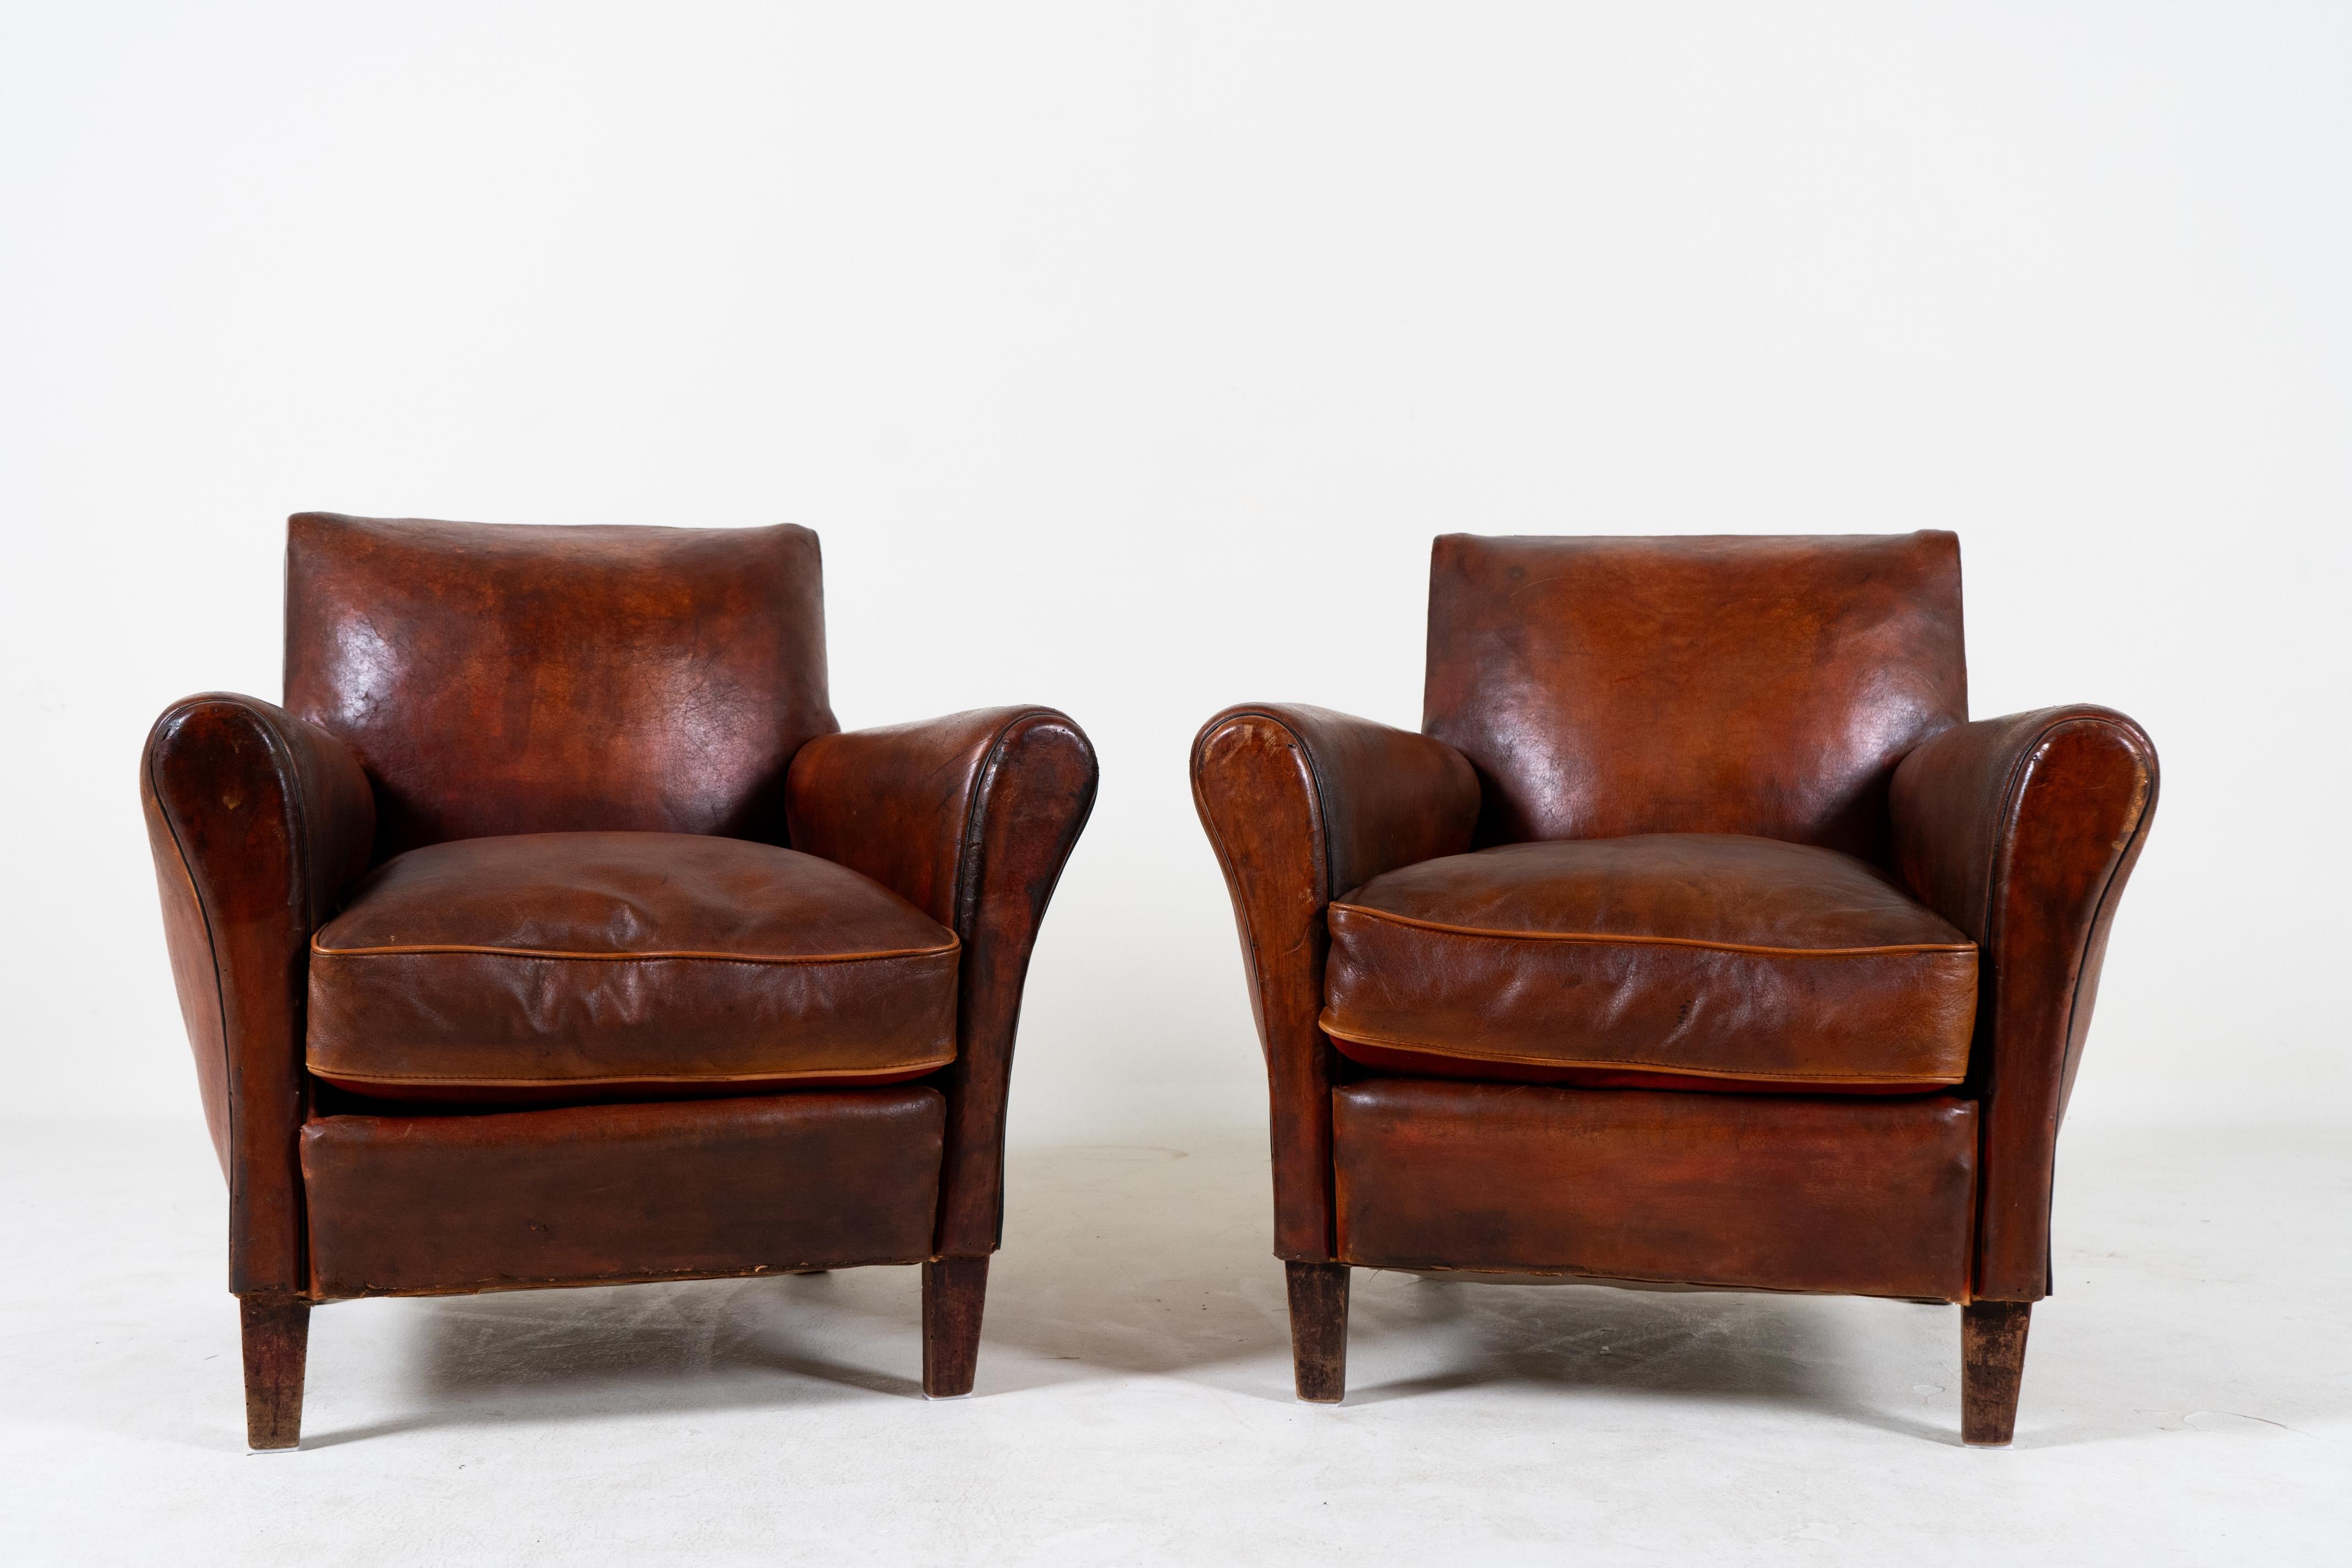 A Vintage Pair of Leather Club Chairs, France 1940 For Sale 4